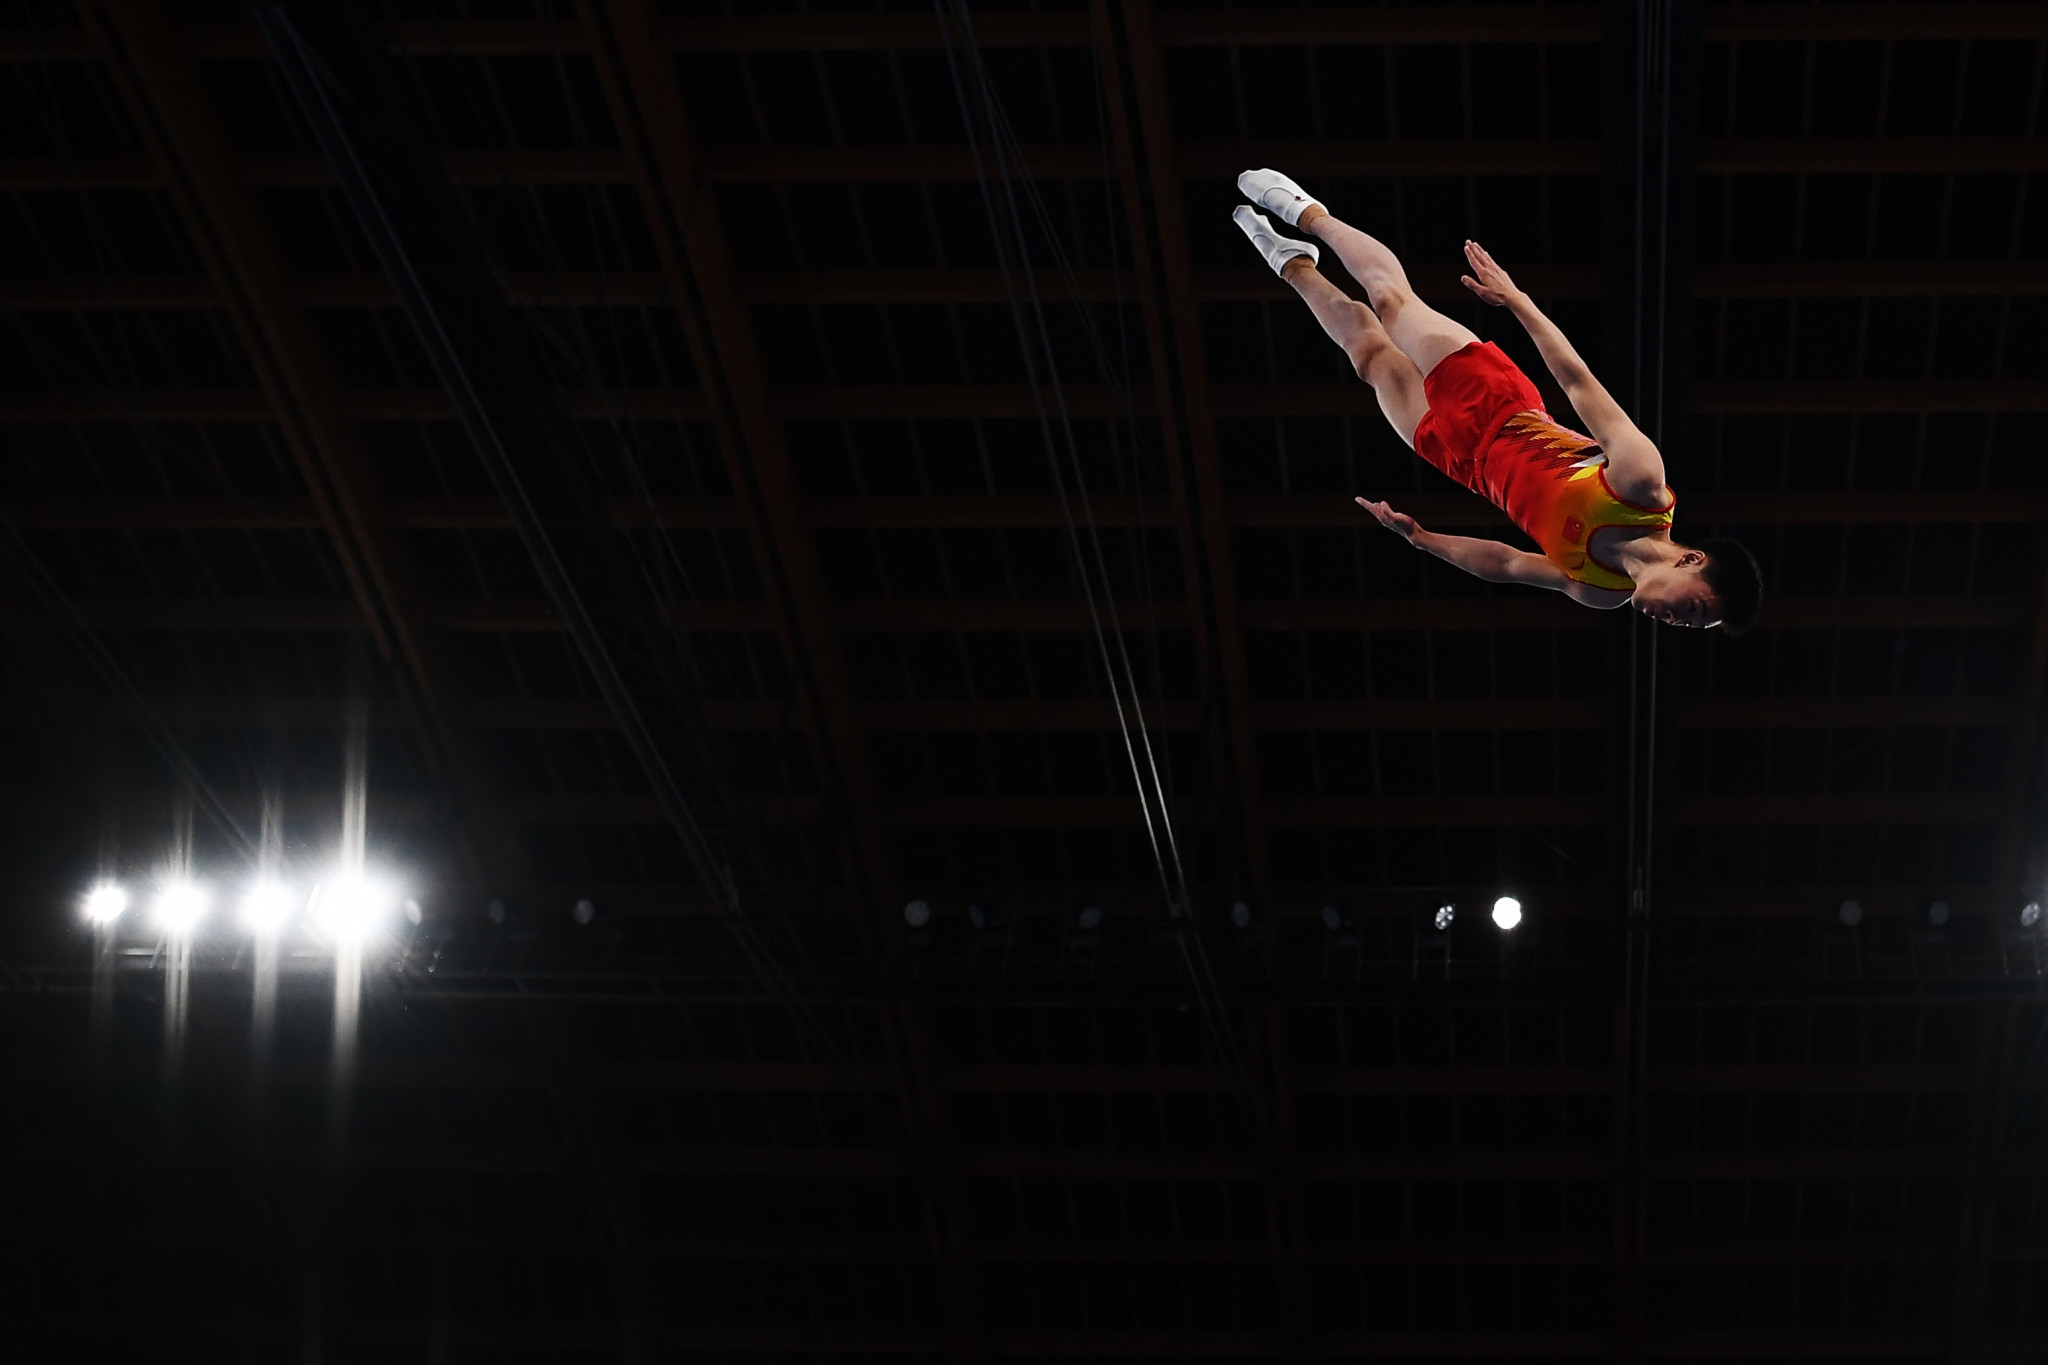 A successor to Gao Lei as men's world champion will be crowned in Baku ©Getty Images